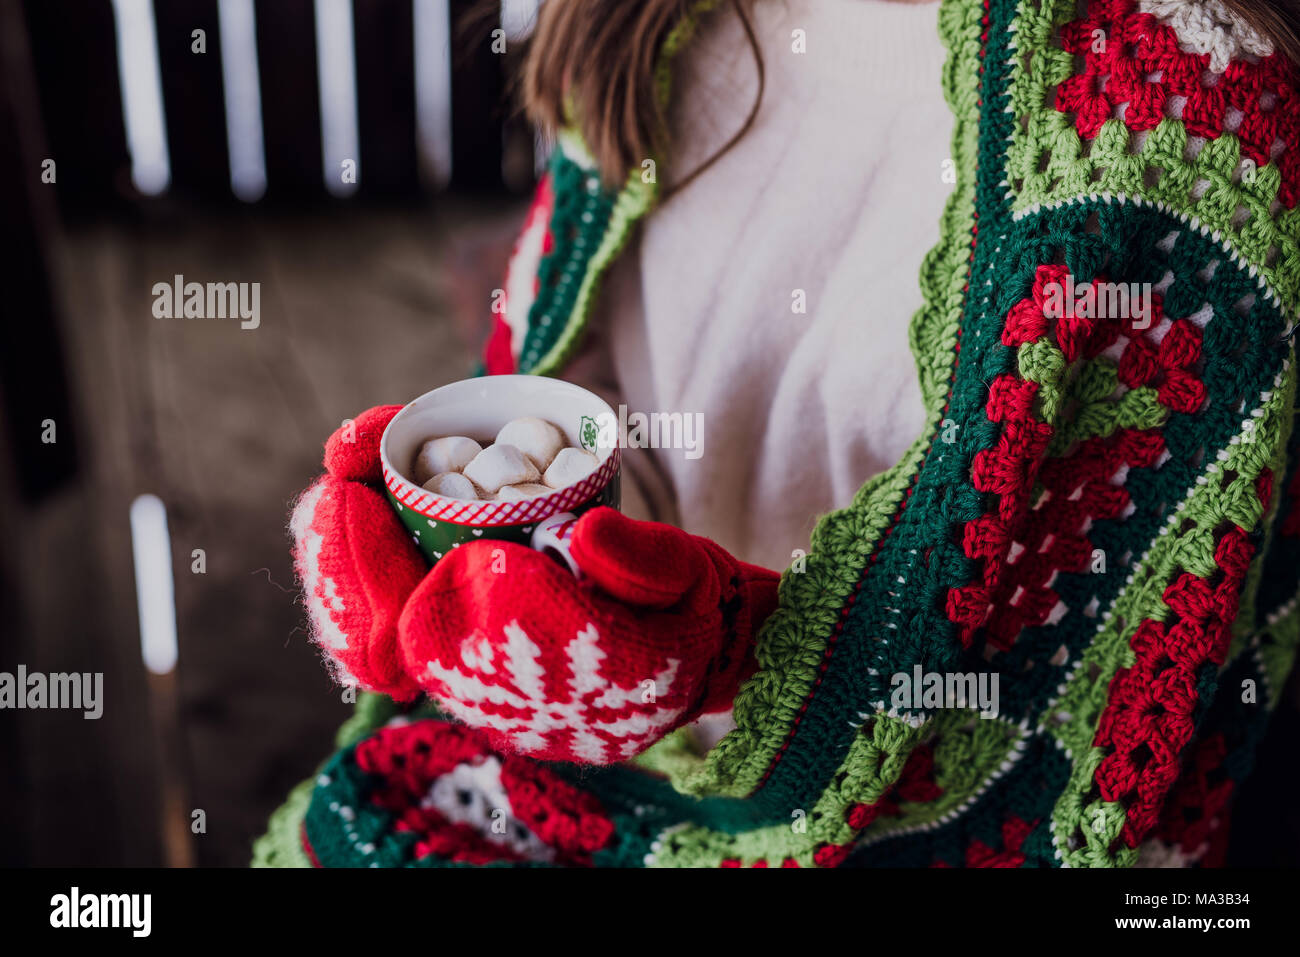 young woman wrapped in a blanket,holding a cup,detail, Stock Photo